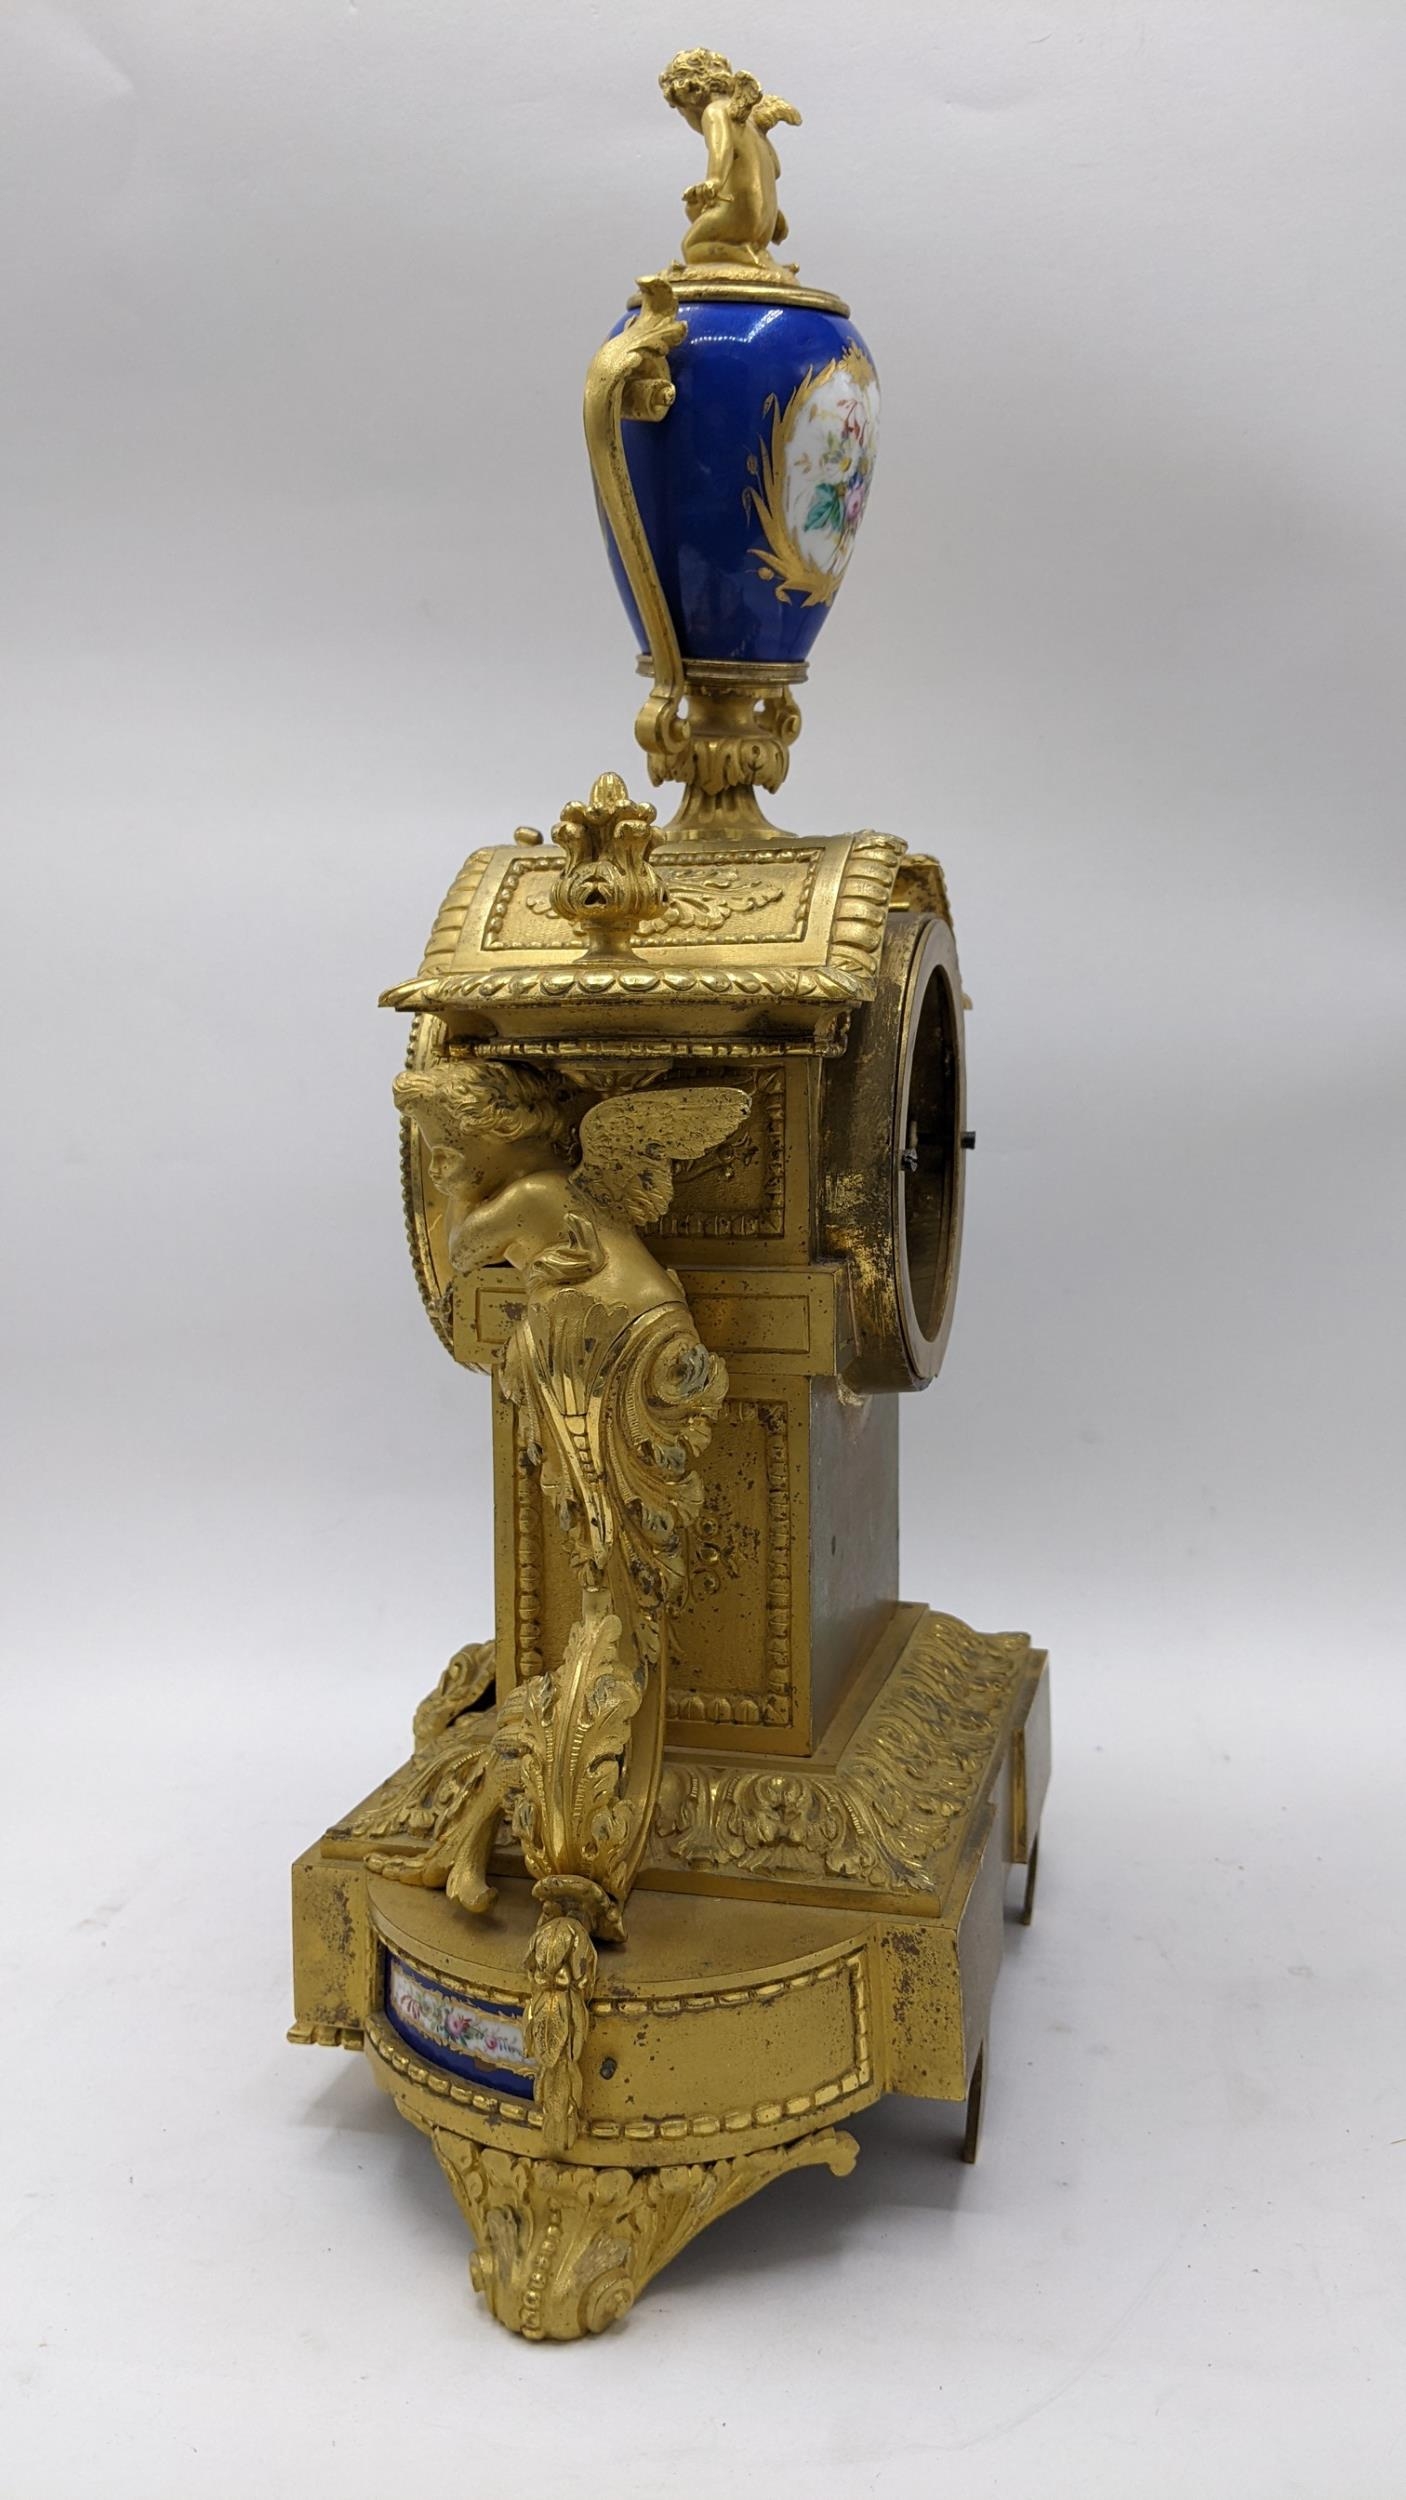 A 19th century French gilt bronze mantle clock, the case having Sevres style porcelain panels, urn - Image 2 of 5